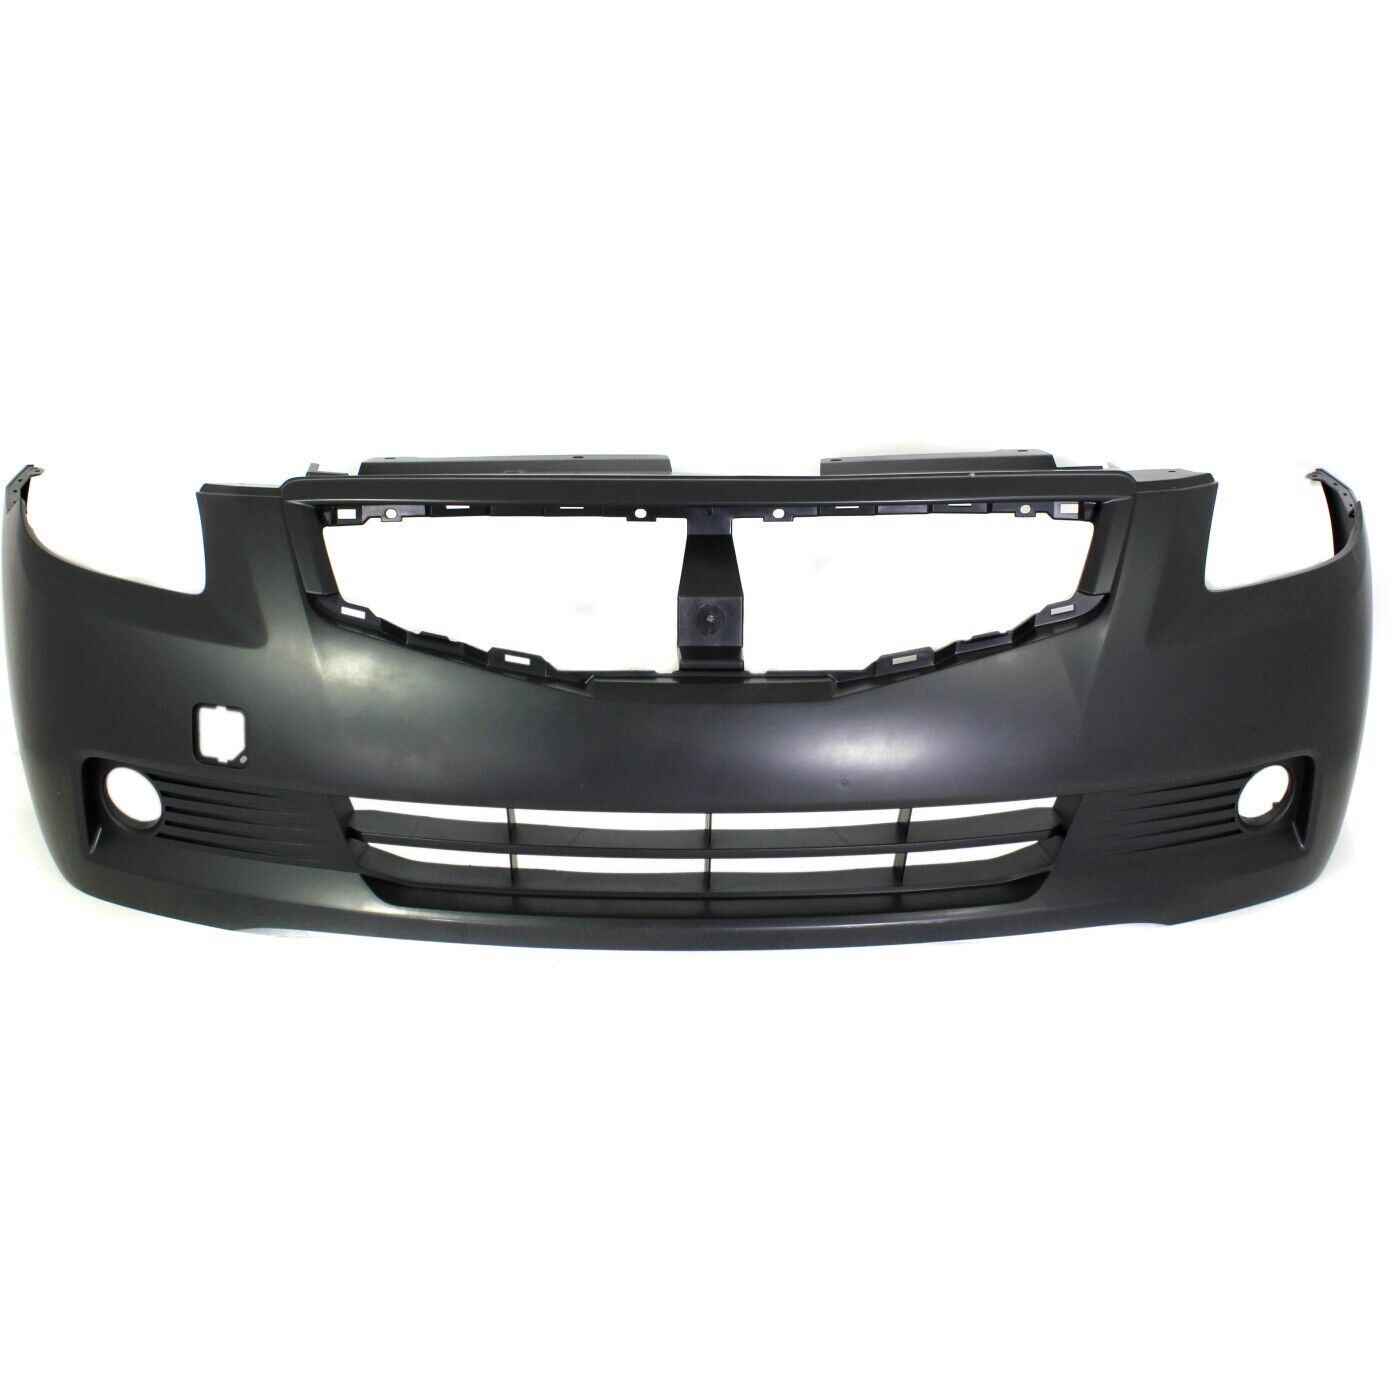 Bumper Cover For 2008 2009 Nissan Altima Coupe Primed Front 62022JB100